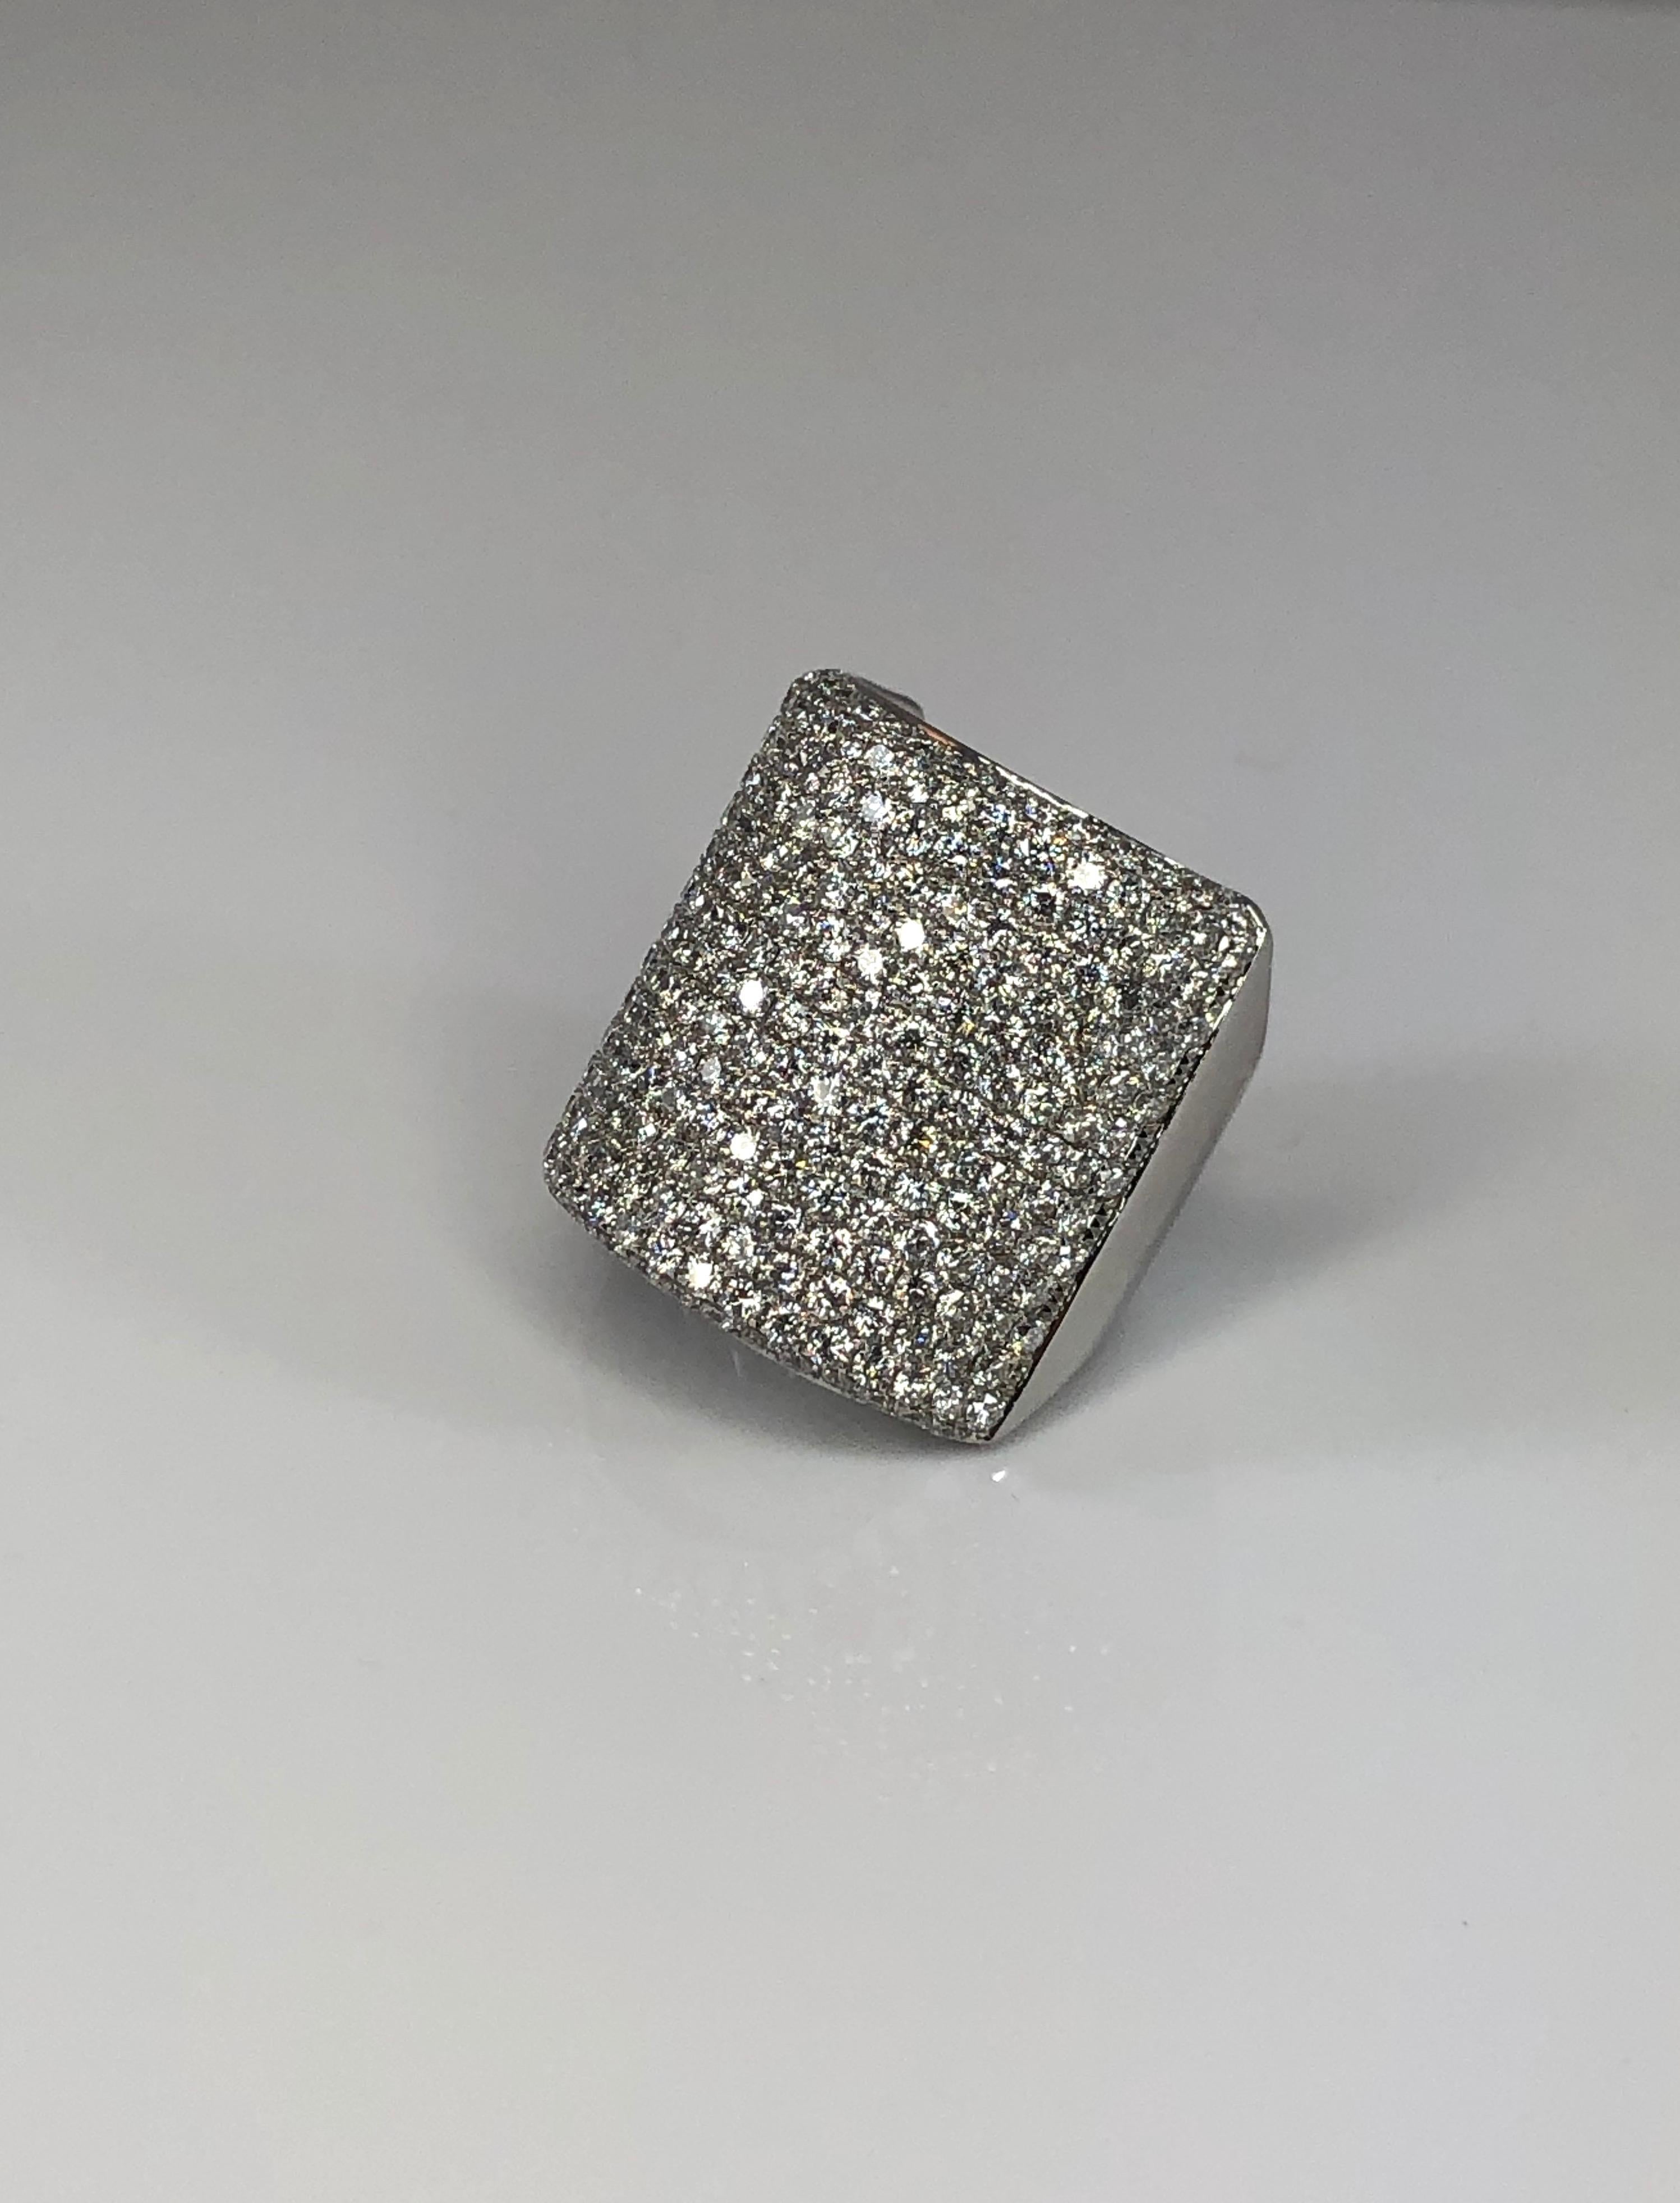 S.Georgios designer wide band ring is handmade from 18 Karat White gold in Athens Greece and features a total weight of 5.20 Carat microscopically set brilliant-cut White Diamonds. 
Size: 7 (can be custom adjusted to the desired size)
Weight: 11